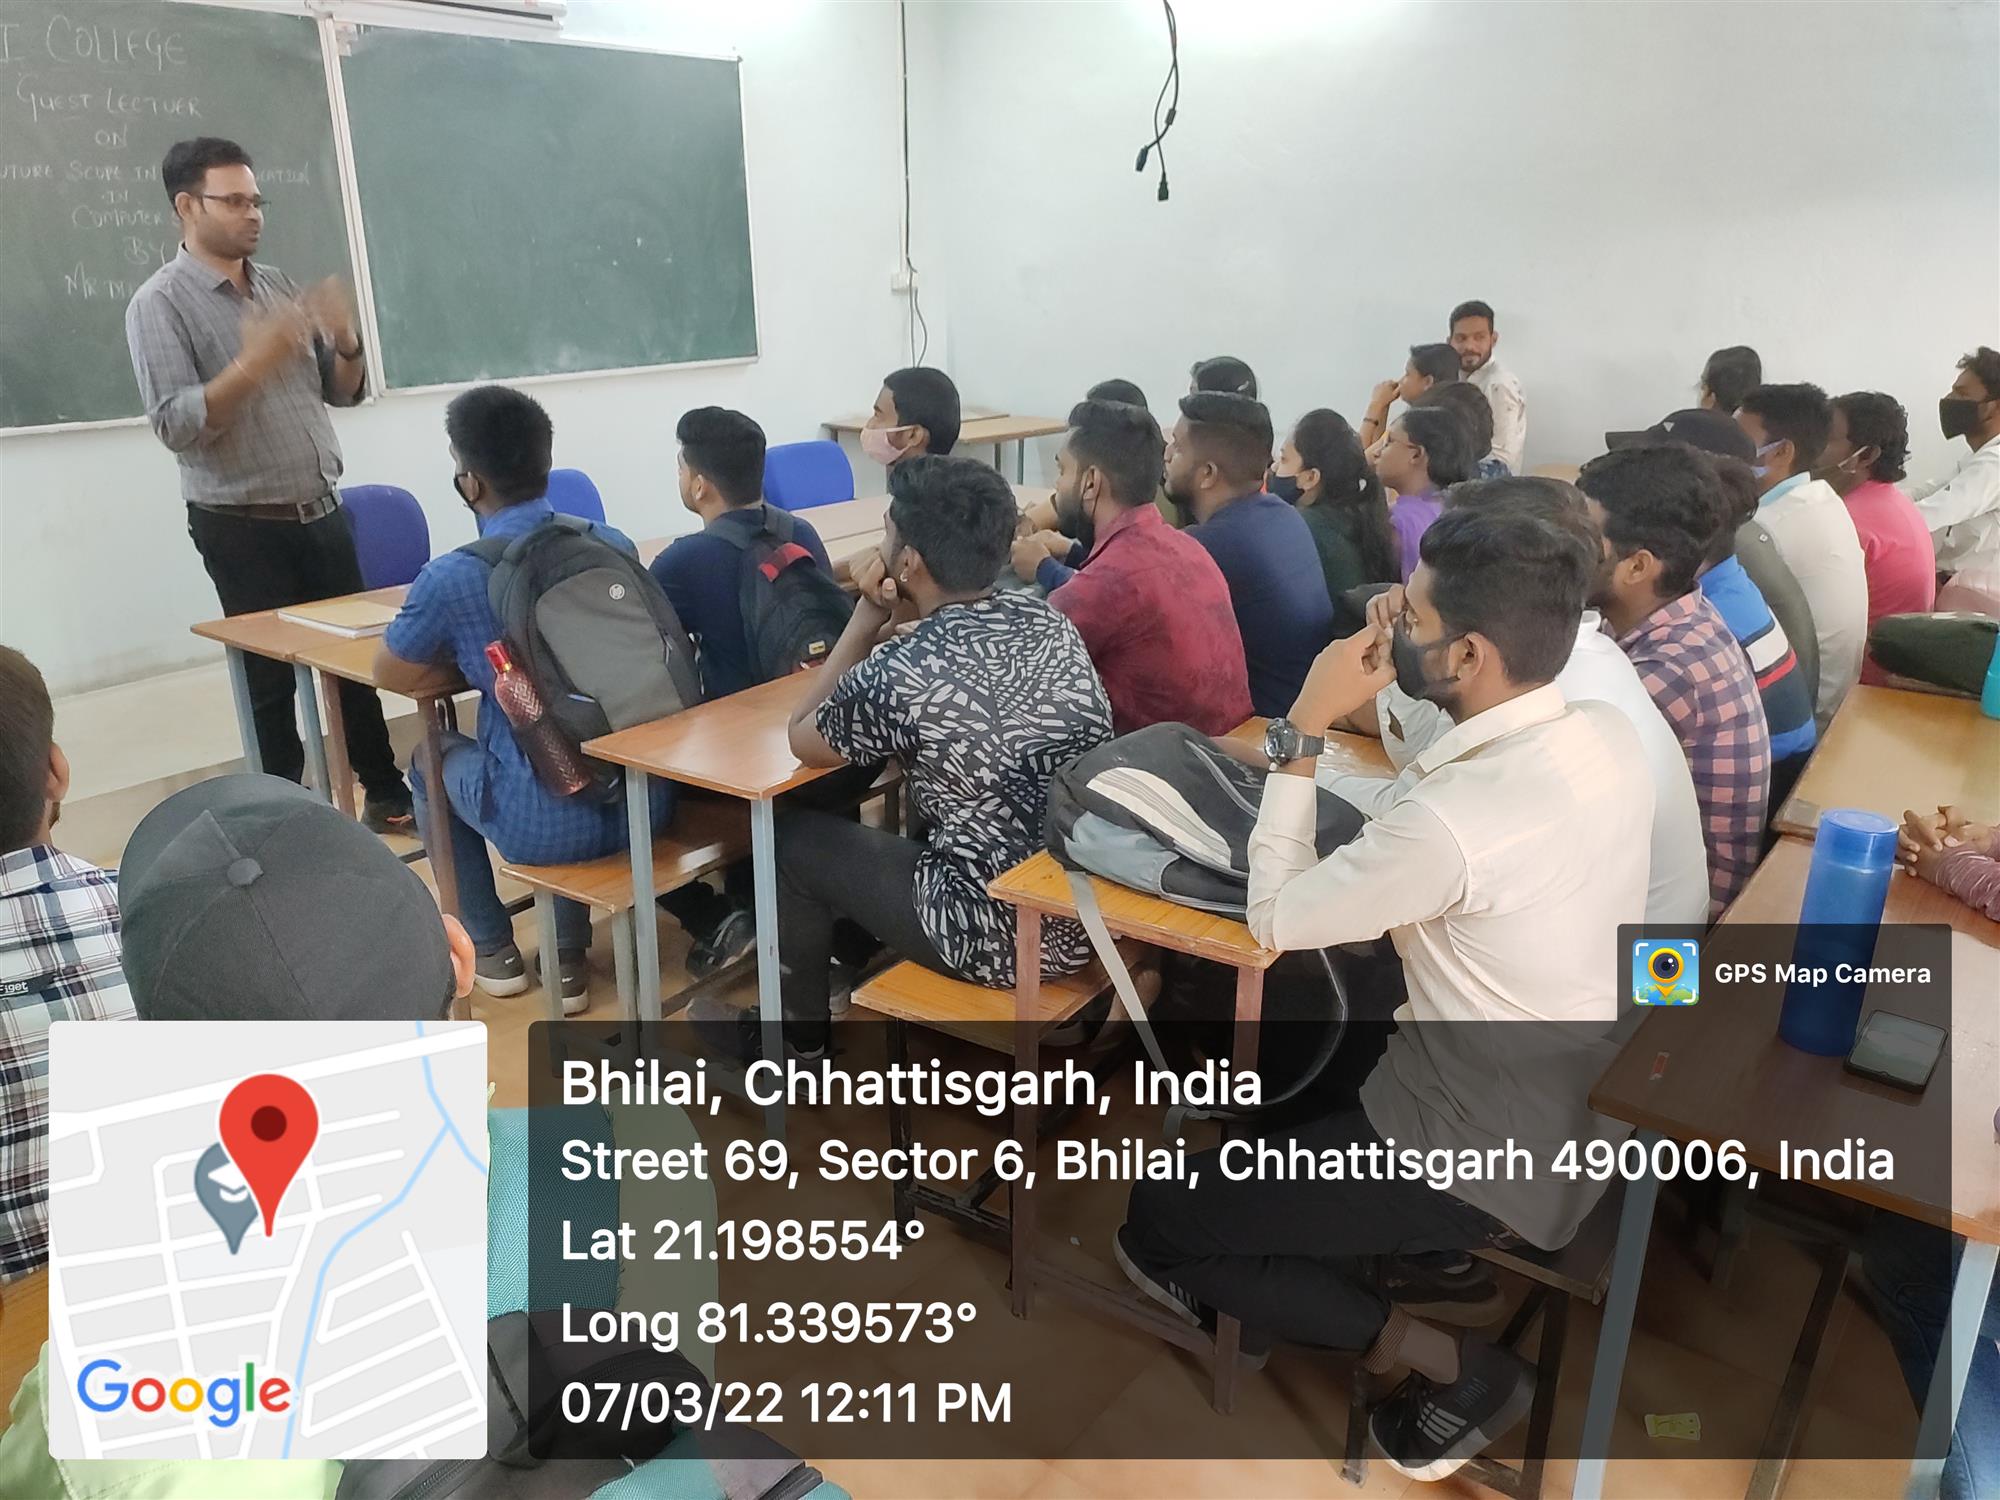 07-03-2022 guest lecture by Mr. dileep Kumar Sahu on Future Scope of Computer Science in Higher education